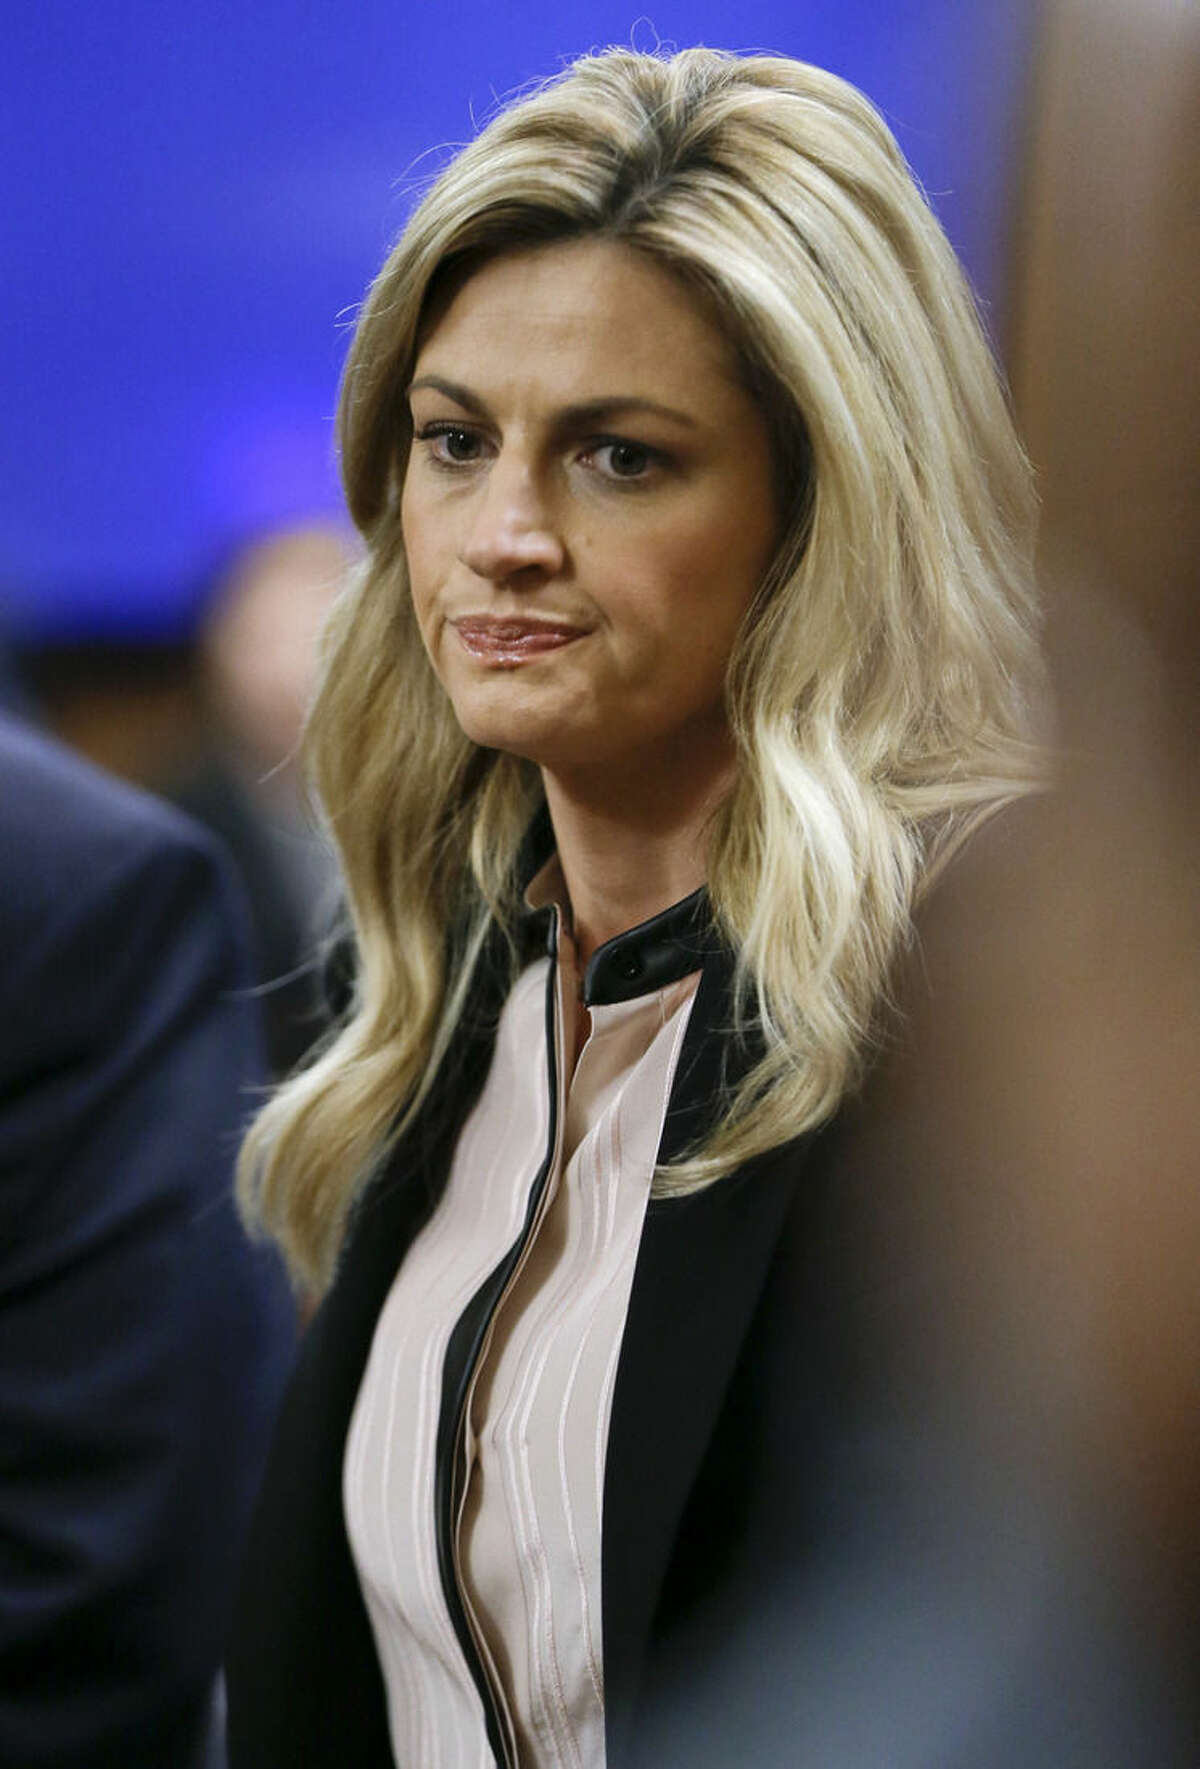 Sportscaster and television host Erin Andrews waits for the jury to enter the courtroom Friday, March 4, 2016, in Nashville, Tenn. Andrews has filed a $75 million lawsuit against the franchise owner and manager of a luxury hotel and a man who admitted to making secret nude recordings of her in 2008. (AP Photo/Mark Humphrey, Pool)